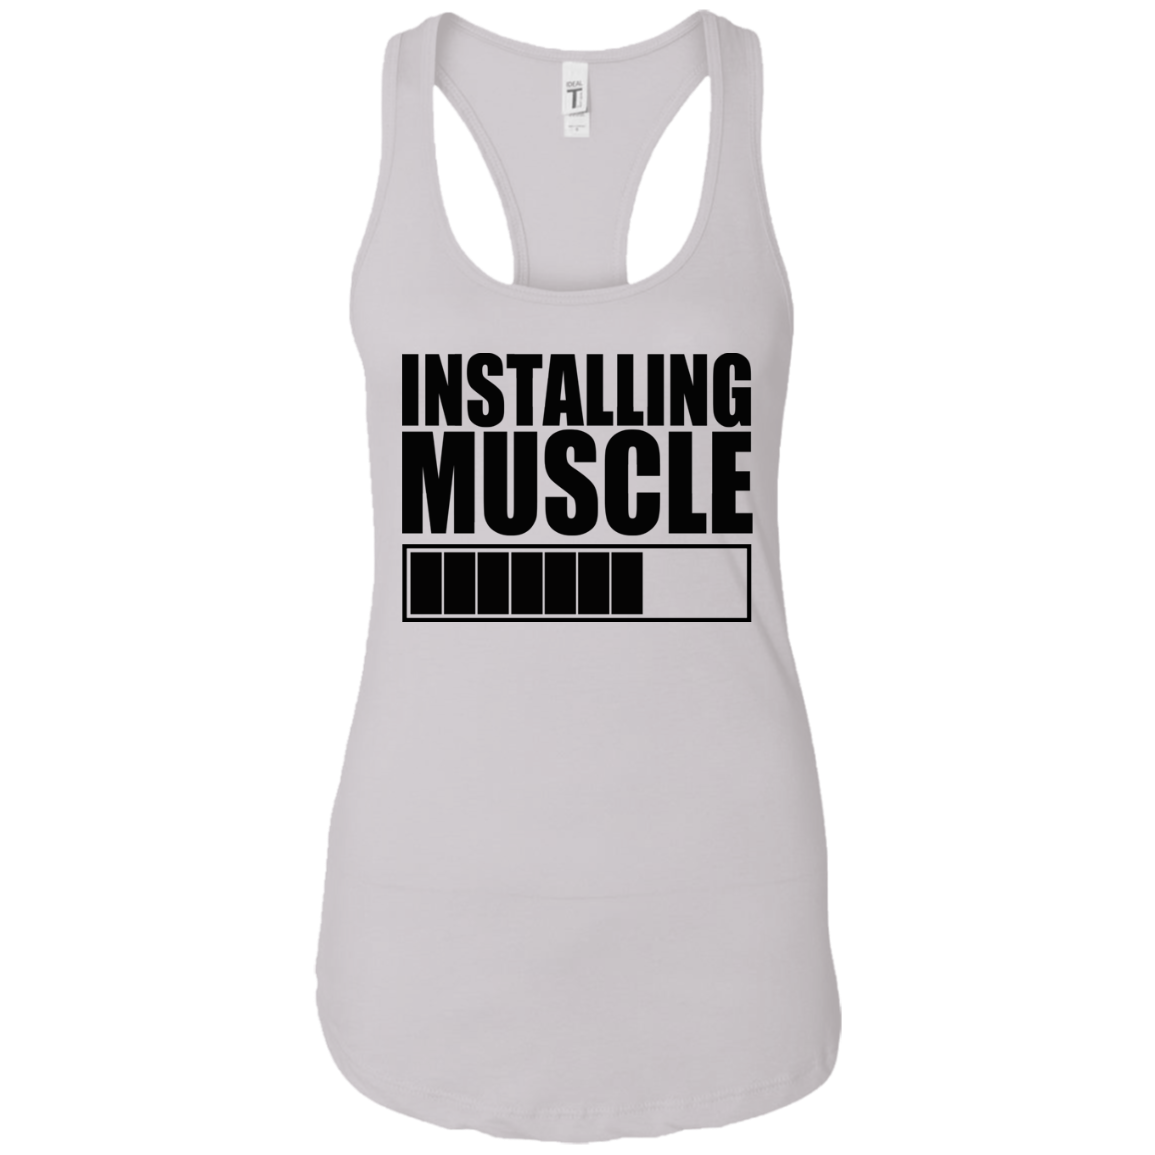 Installing Muscle Next Level Ladies Ideal Racerback Tank